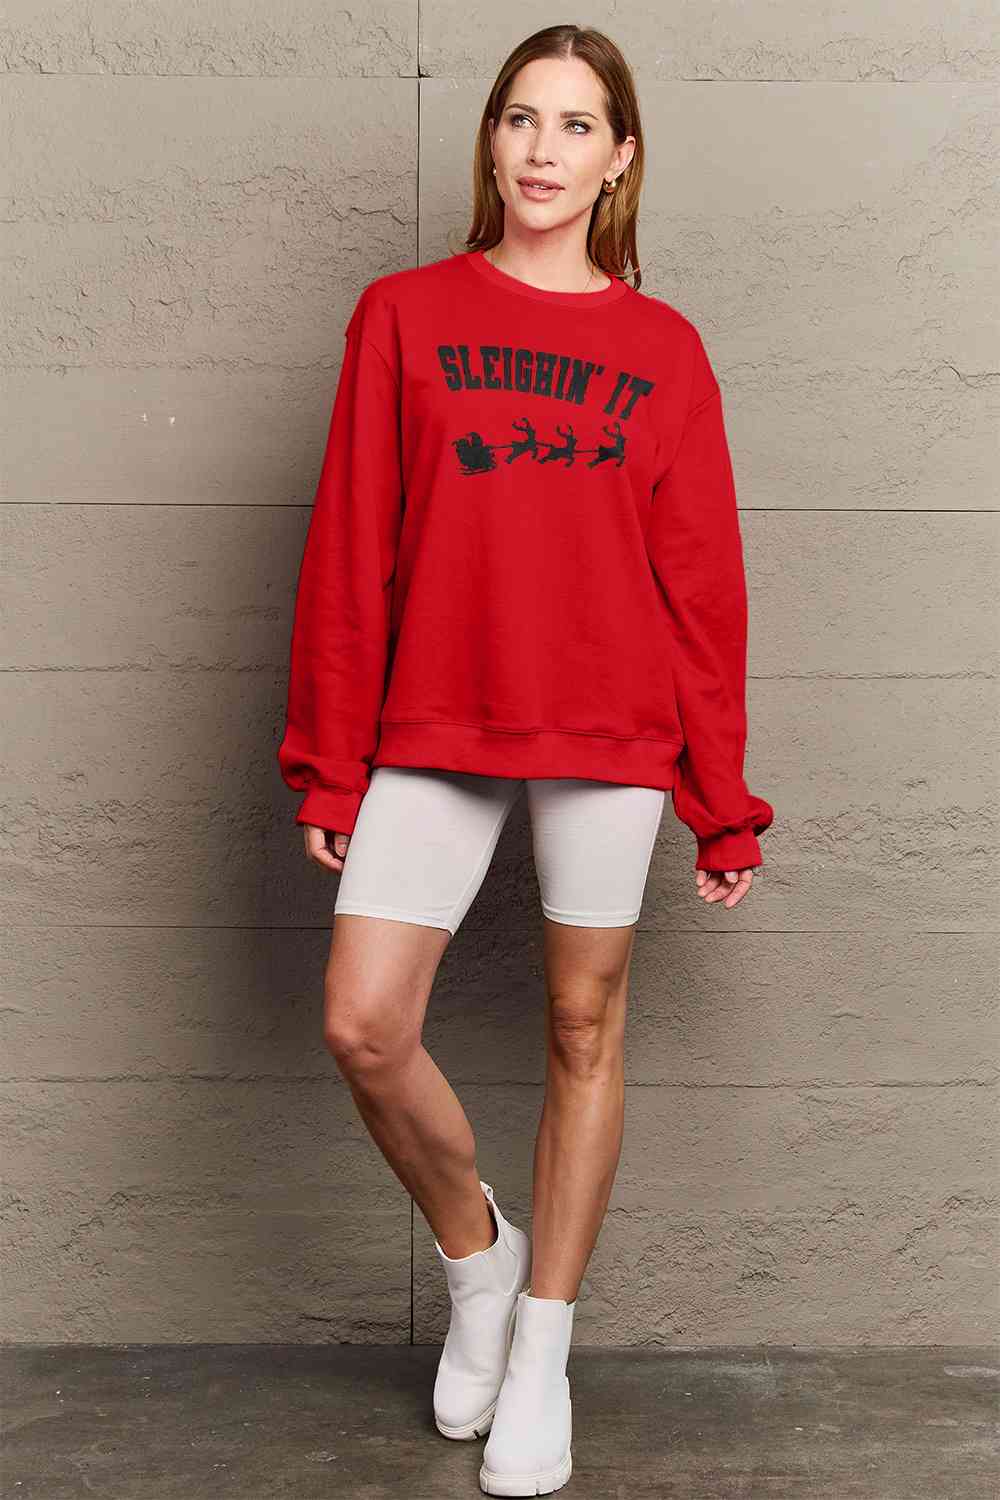 Simply Love Full Size SLEIGHIN' IT Graphic Sweatshirt - GemThreads Boutique